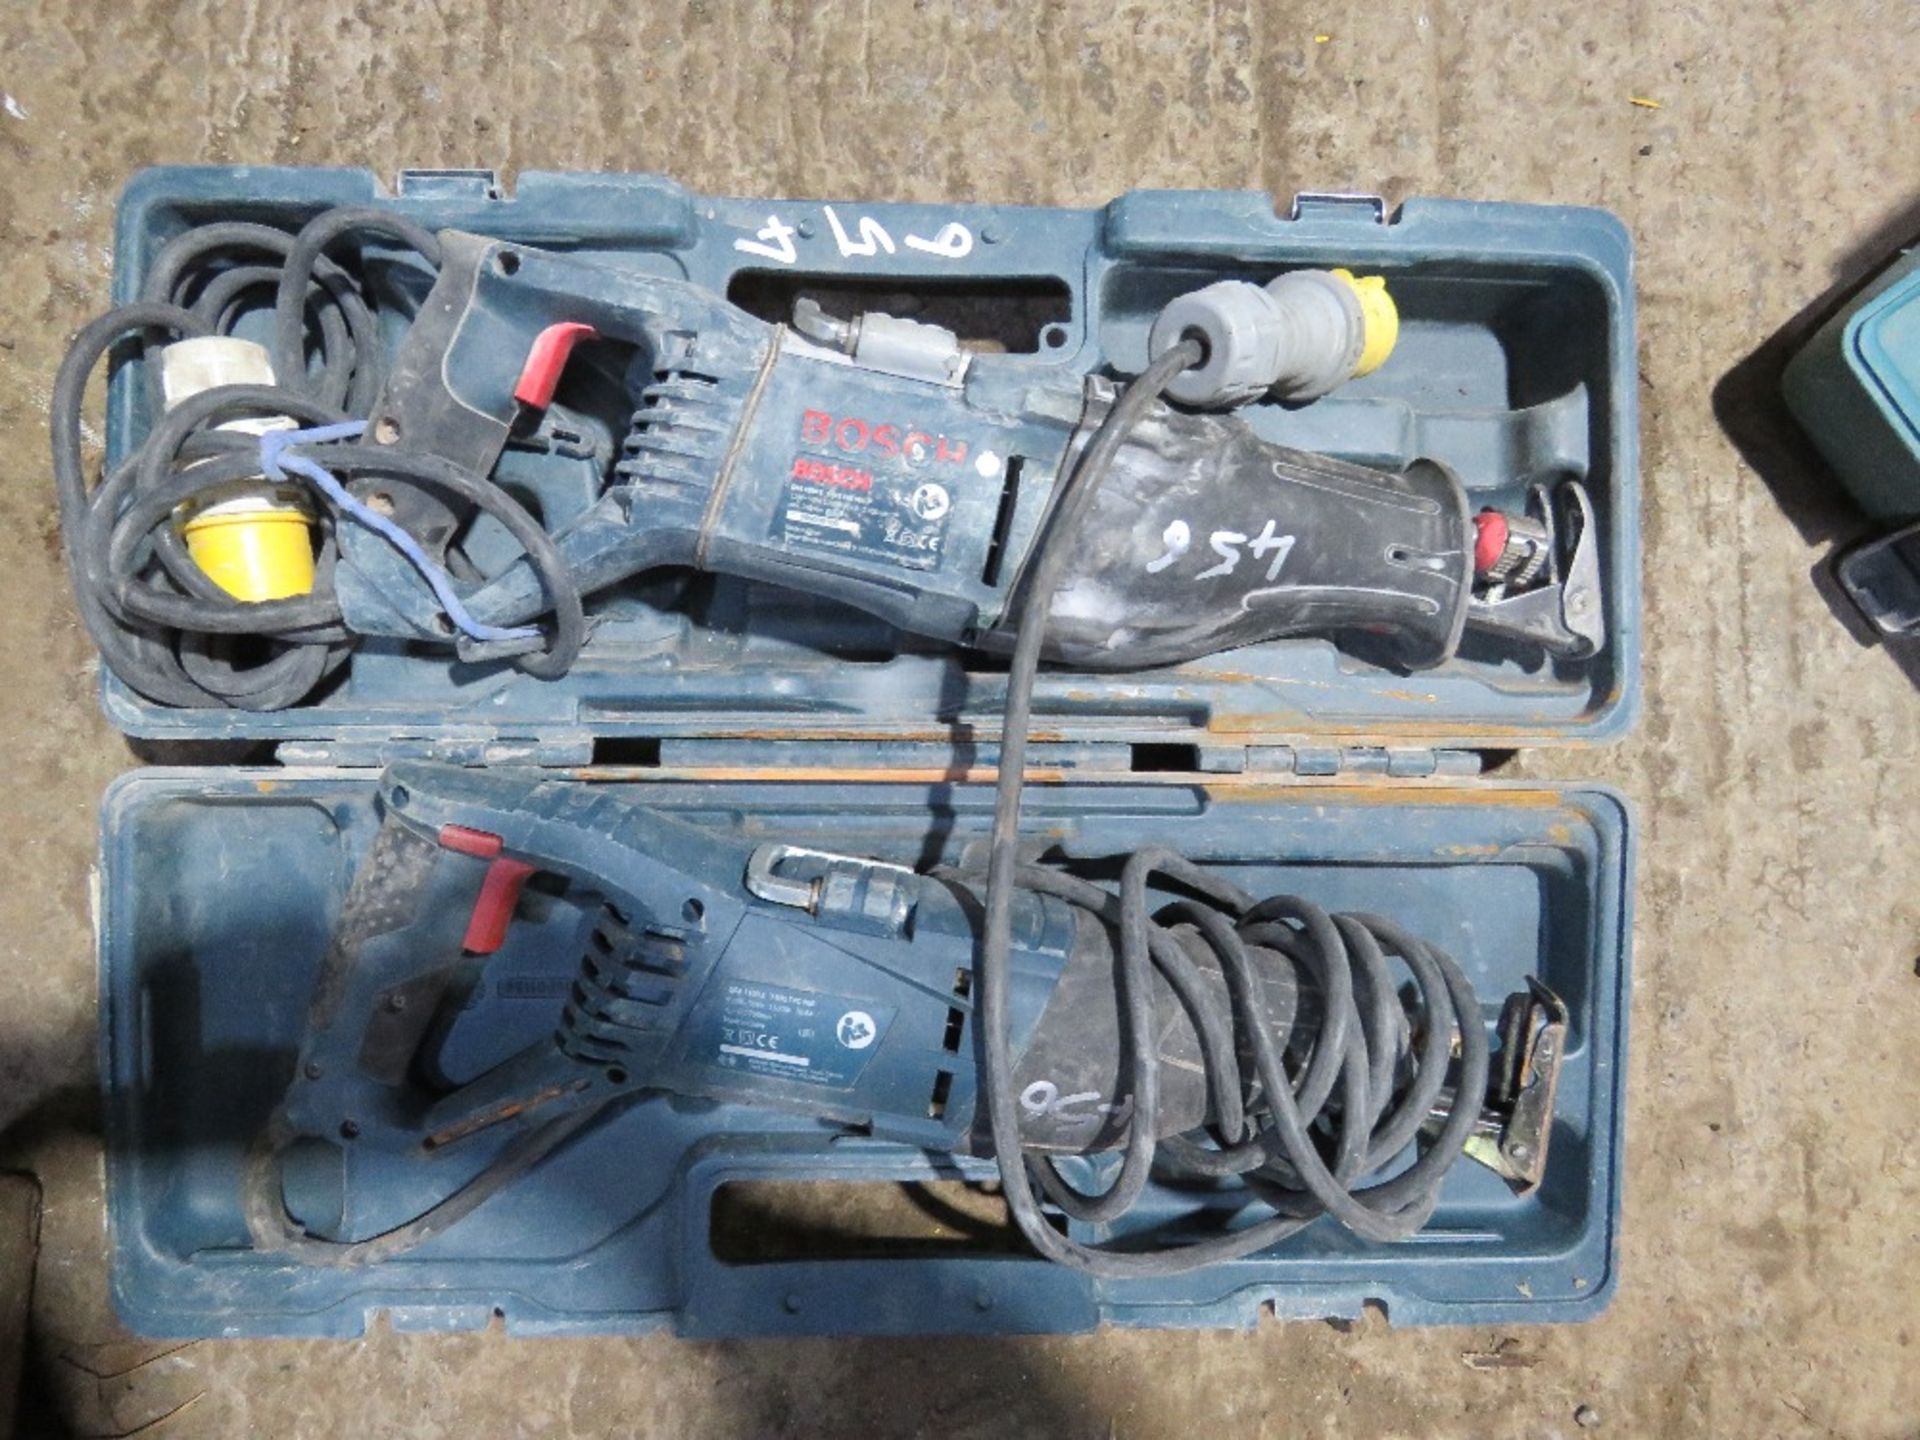 4 X RECIPROCATING SAWS. 110VOLT POWERED. SOURCED FROM COMPANY LIQUIDATION. THIS LOT IS SOLD UNDE - Image 2 of 2